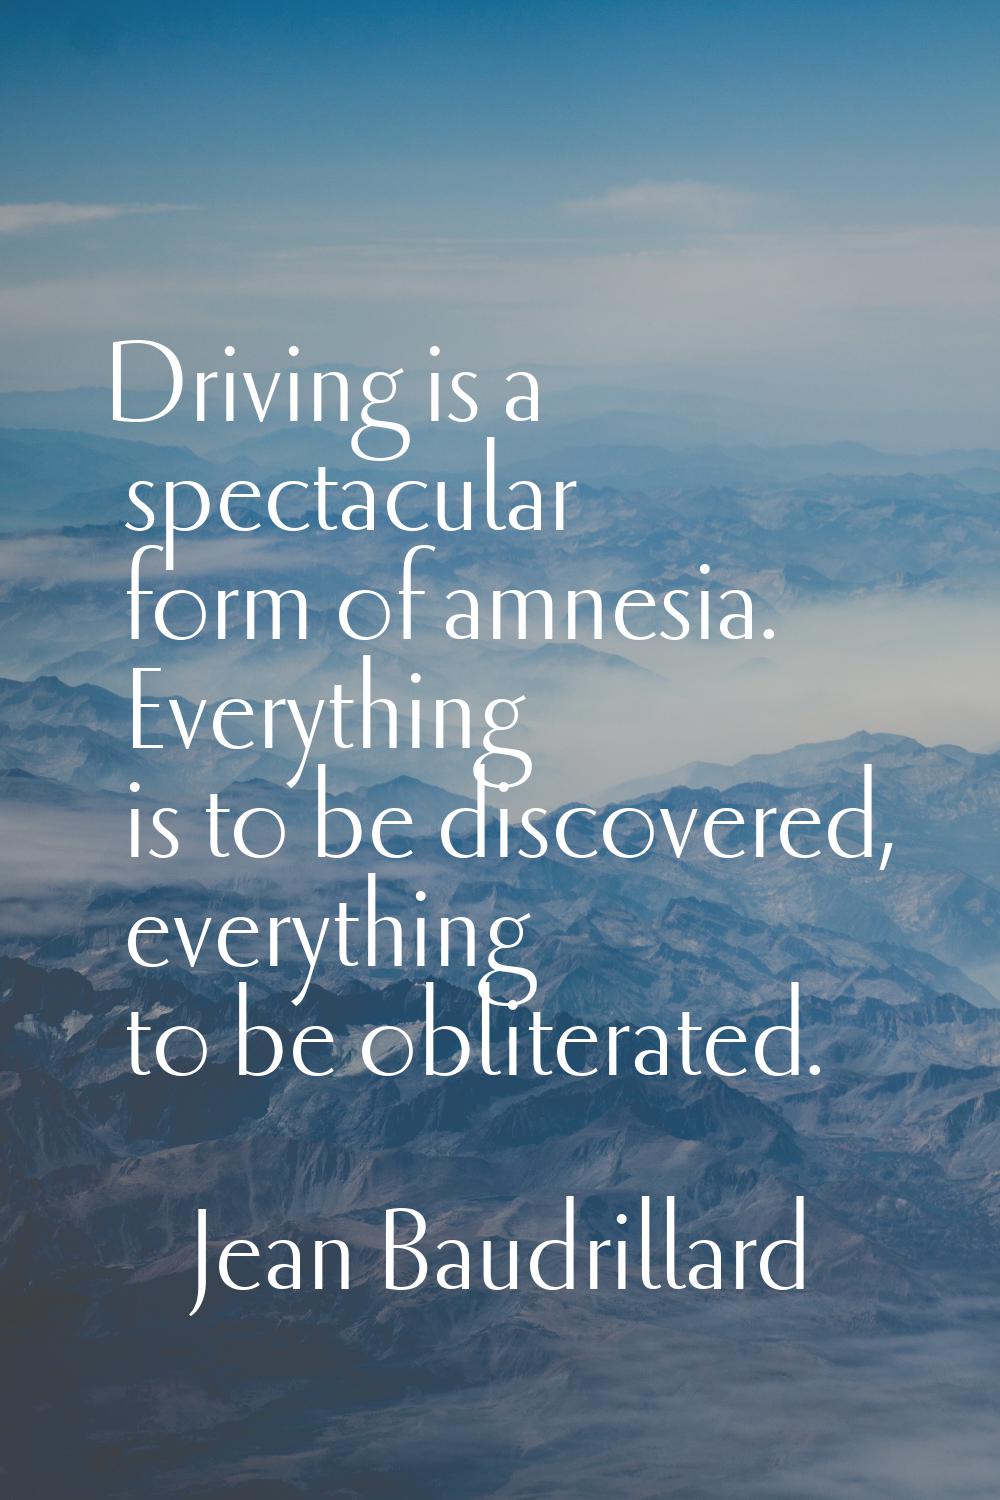 Driving is a spectacular form of amnesia. Everything is to be discovered, everything to be oblitera